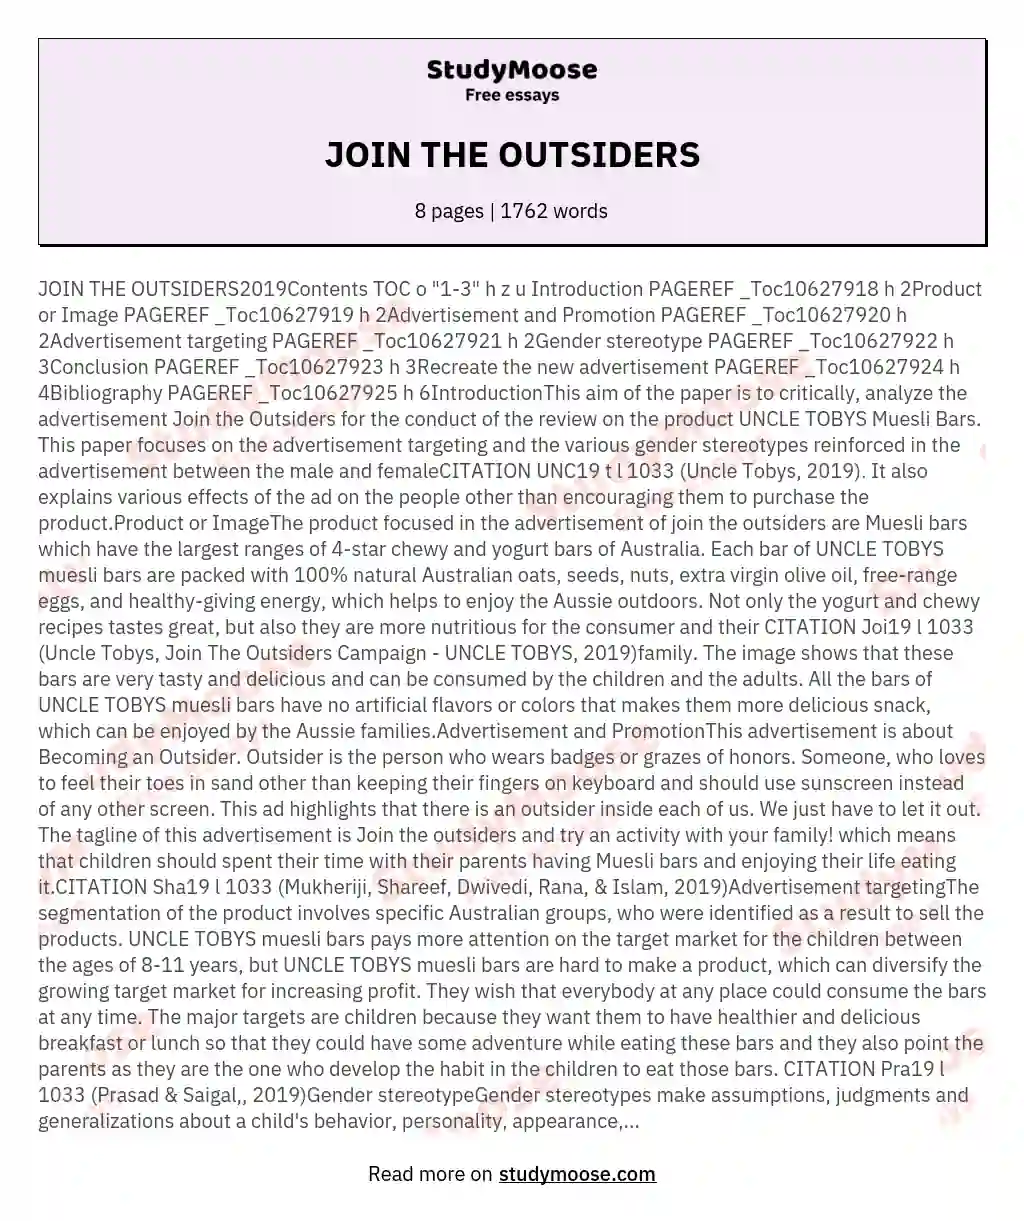 JOIN THE OUTSIDERS essay